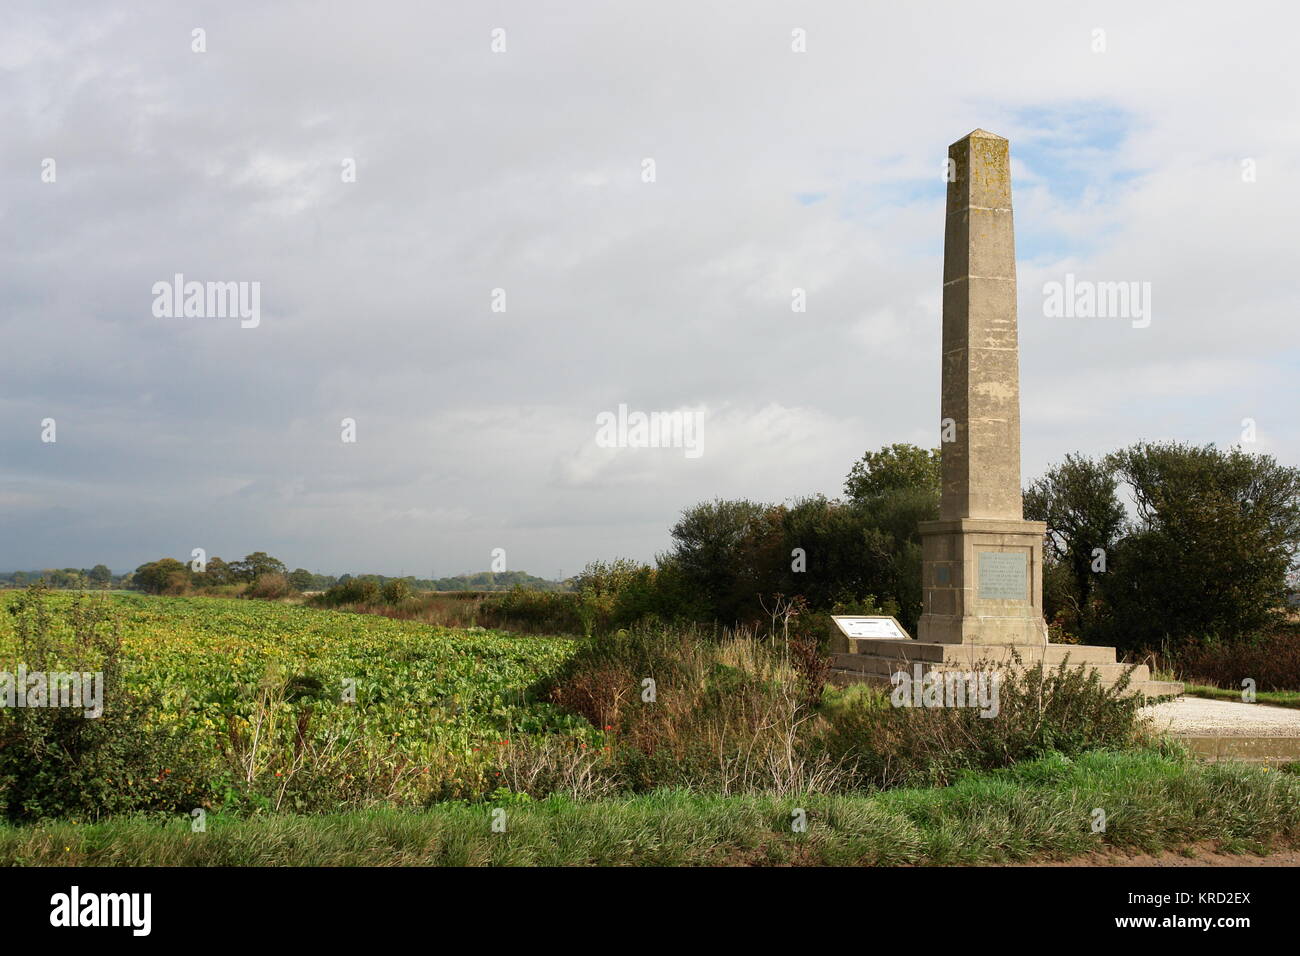 Obelisk commemorating the Battle of Marston Moor (2 July 1644) during the English Civil War, near Long Marston, North Yorkshire.       Date: circa 2007 Stock Photo